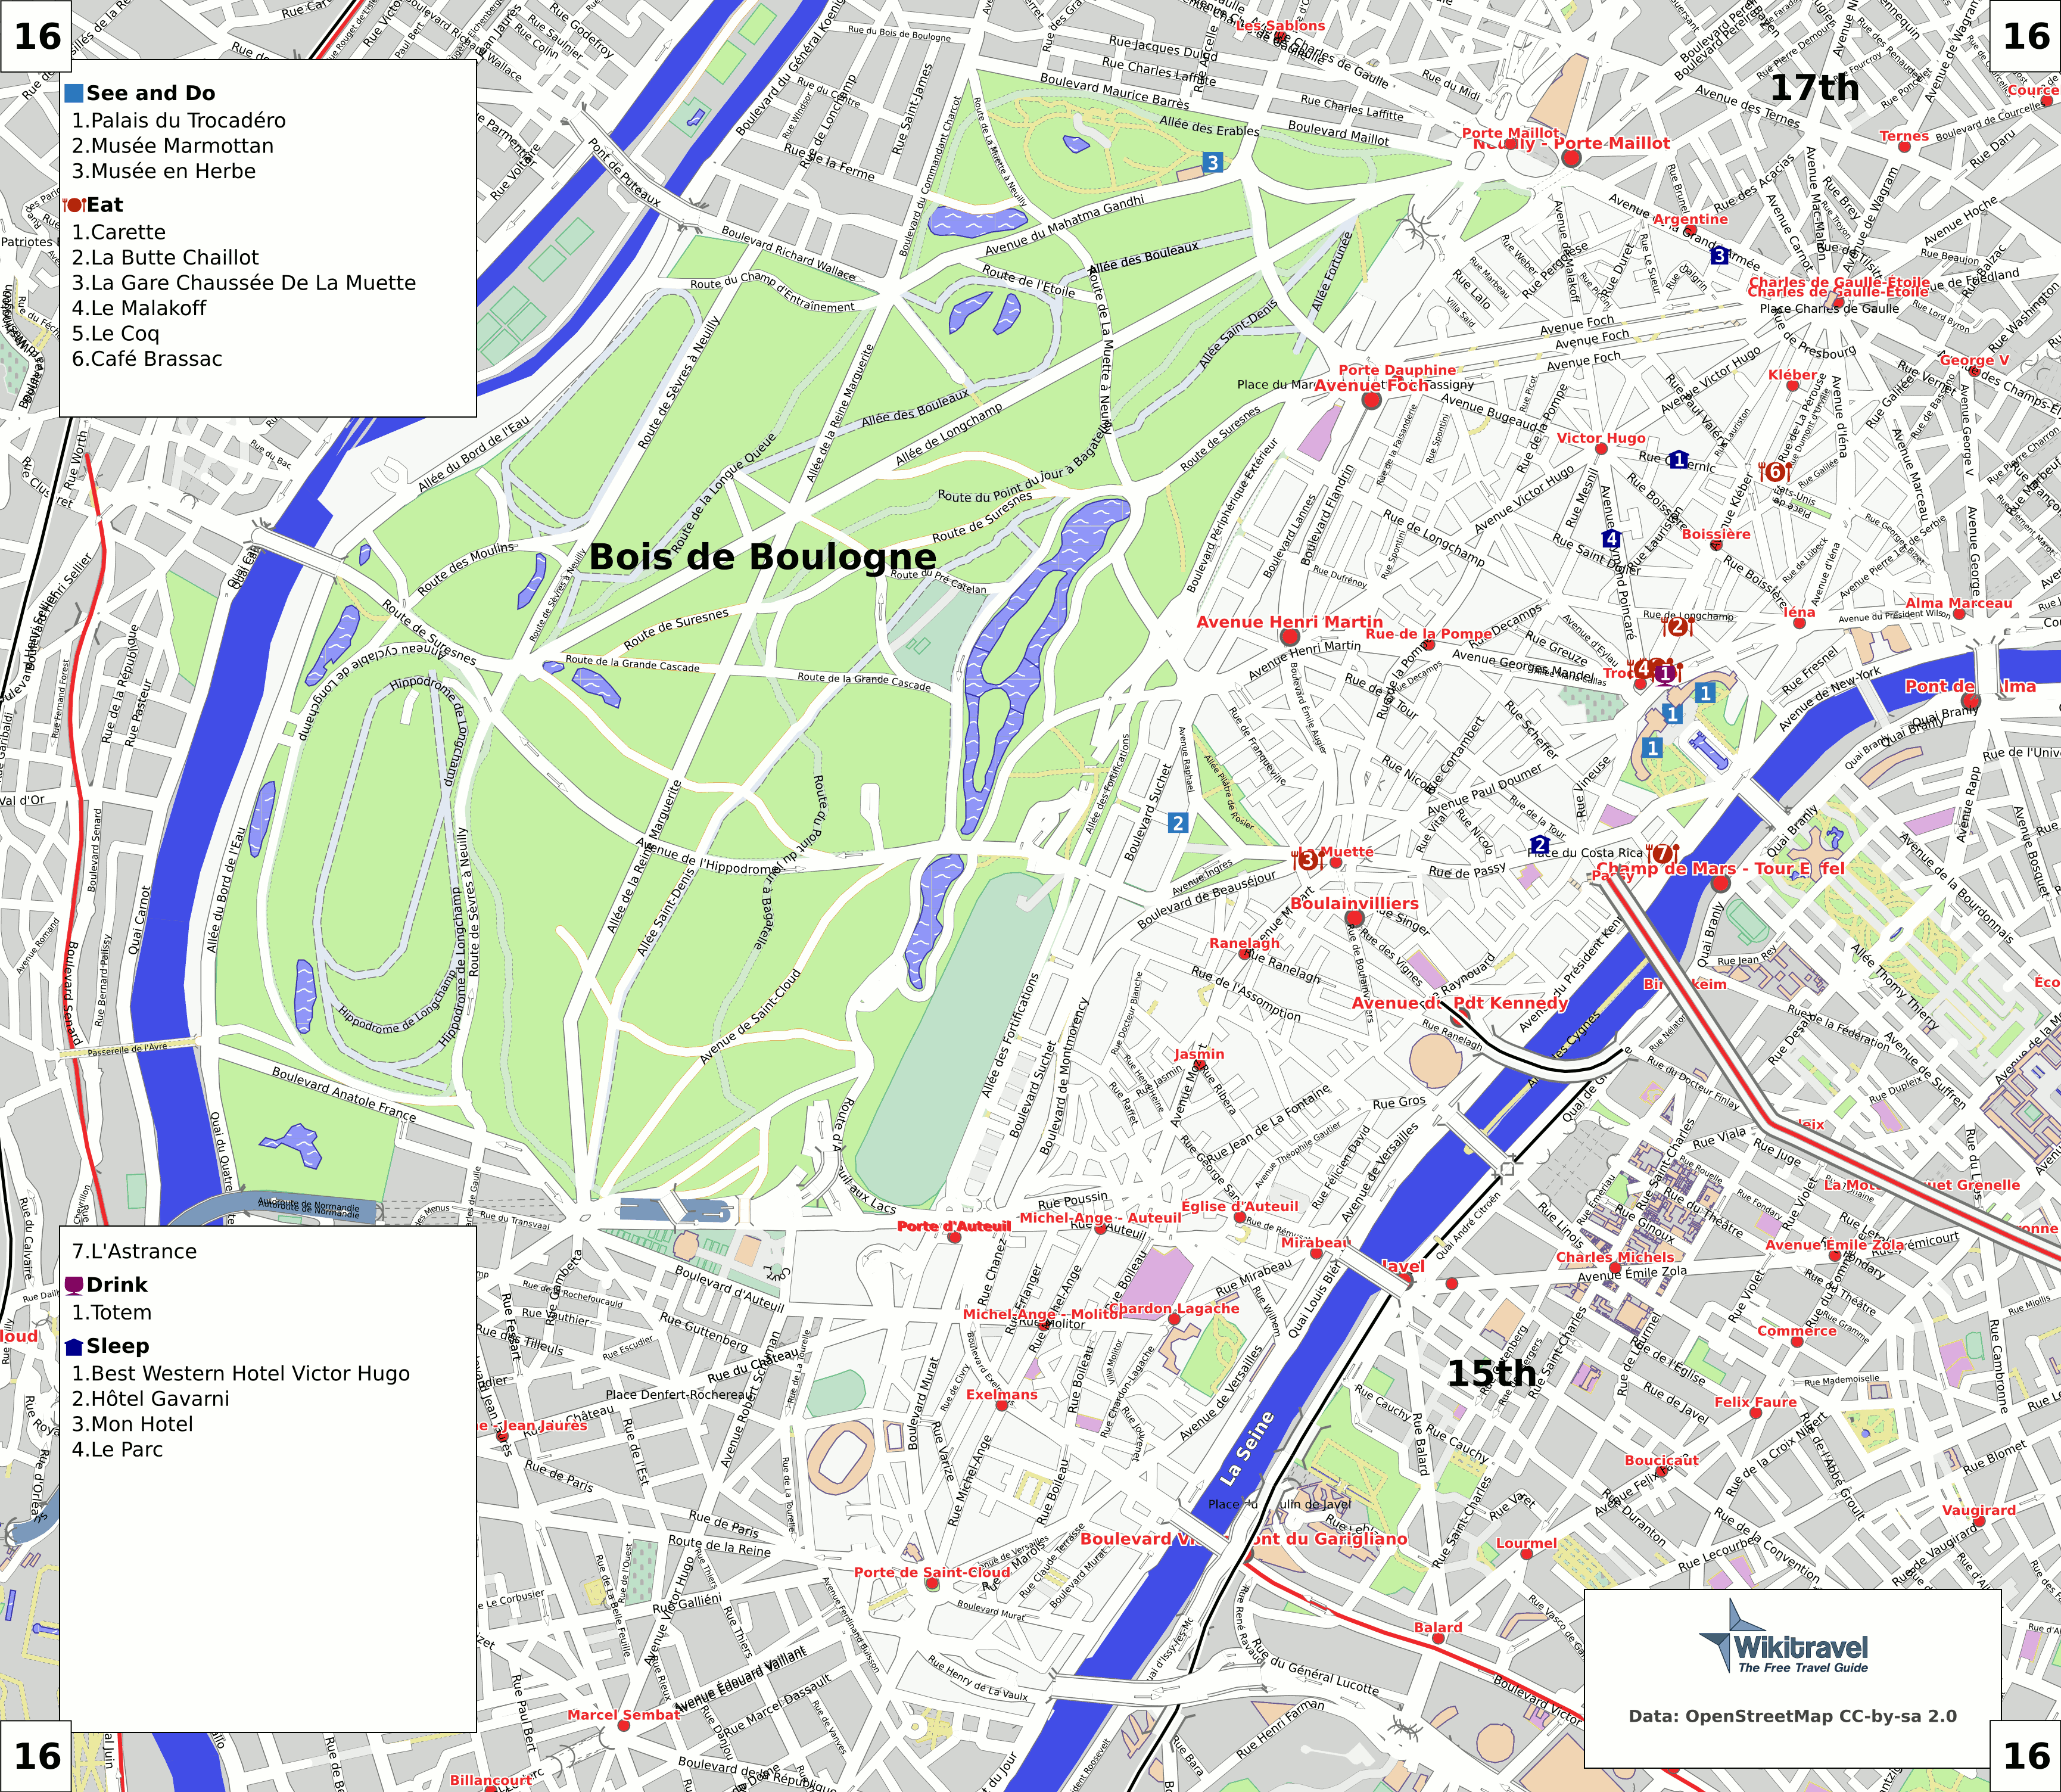 Paris 16th arrondissement map with listings.png